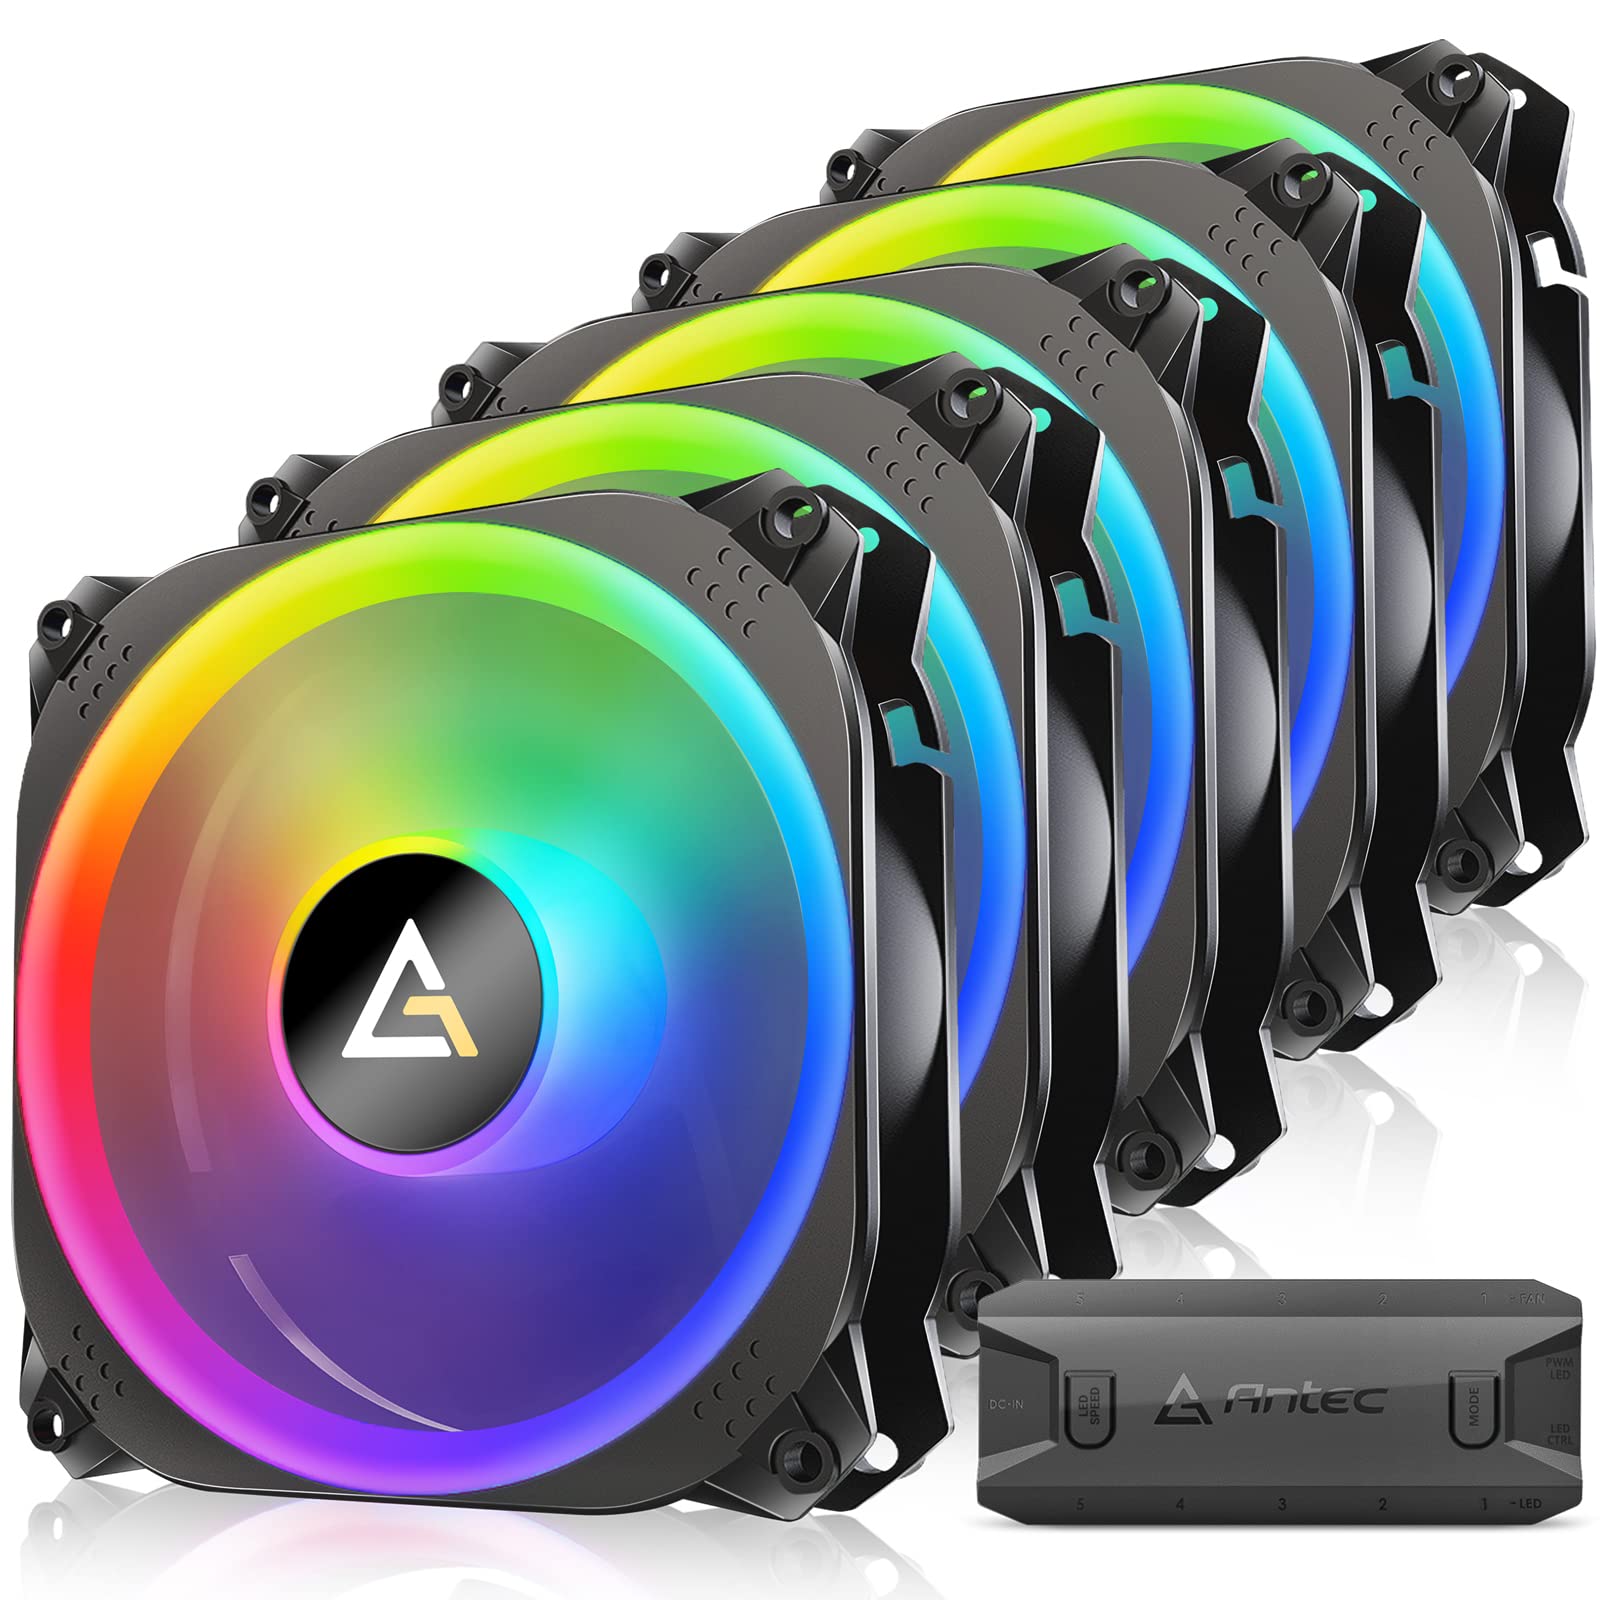 Antec RGB Fans PC Fans 120mm RGB Fans 5V-3PIN Addressable RGB Fans Motherboard SYNC with 5V-3PIN 120mm Fan 5 Packs with C